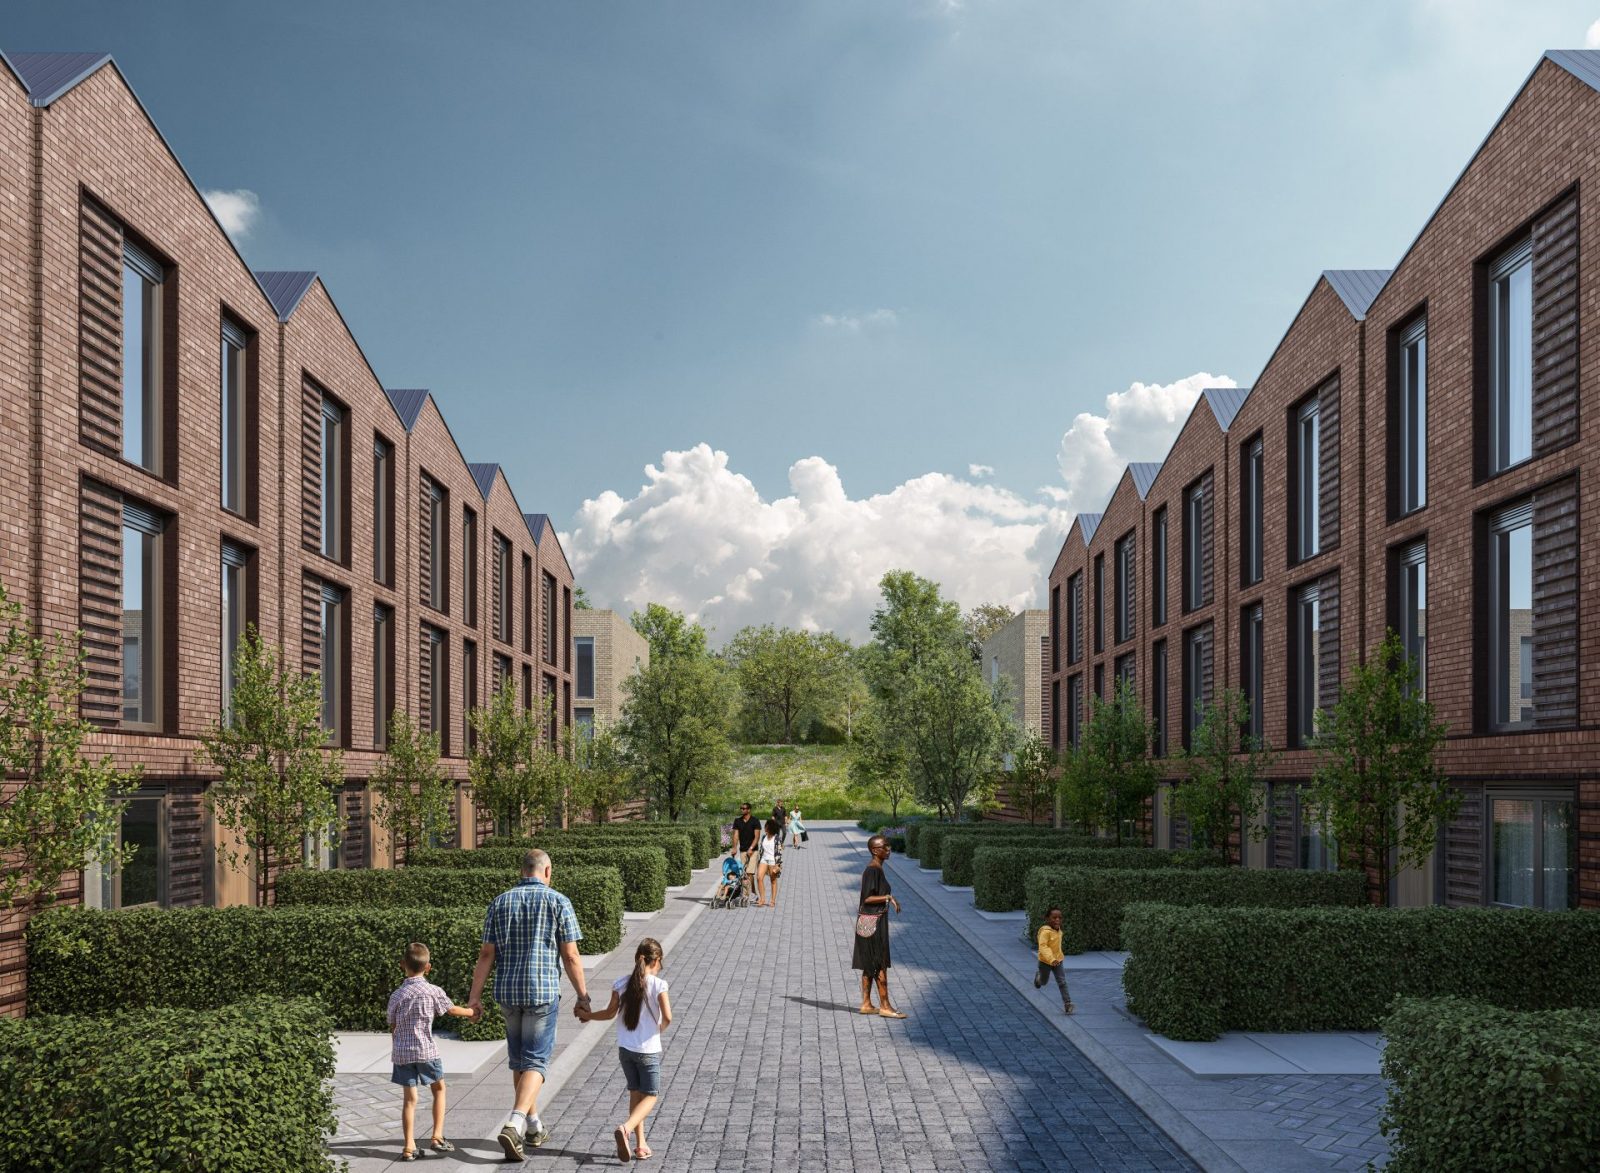 An impression of Darling Associates' Salford and Exeter developments.